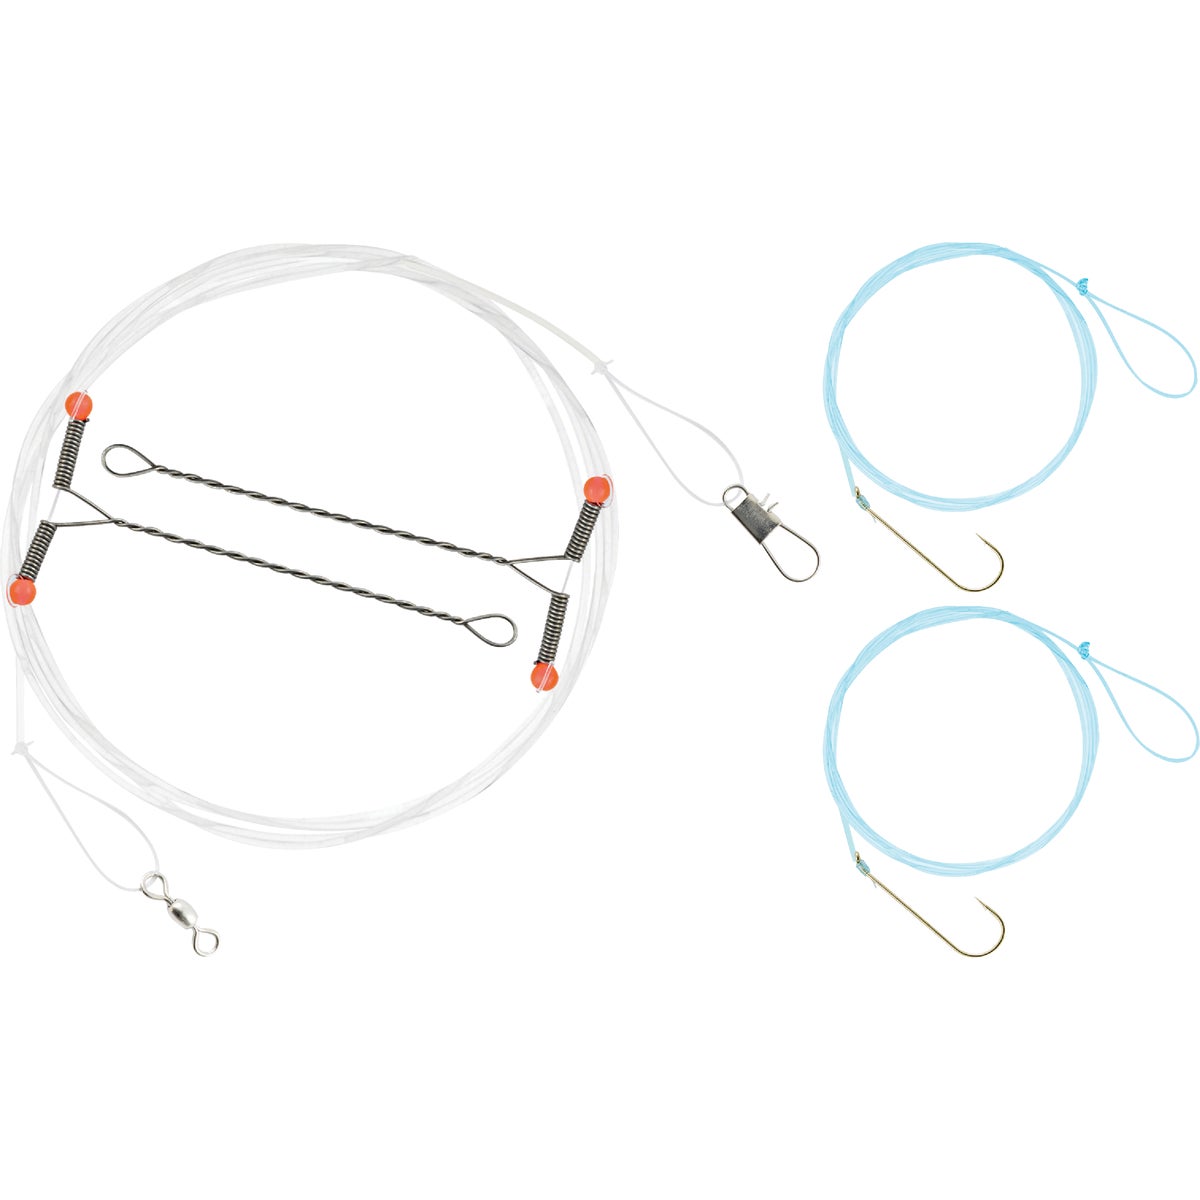 Item 833762, Twin nylon rigs with stainless steel extension arms that allow minnow to 